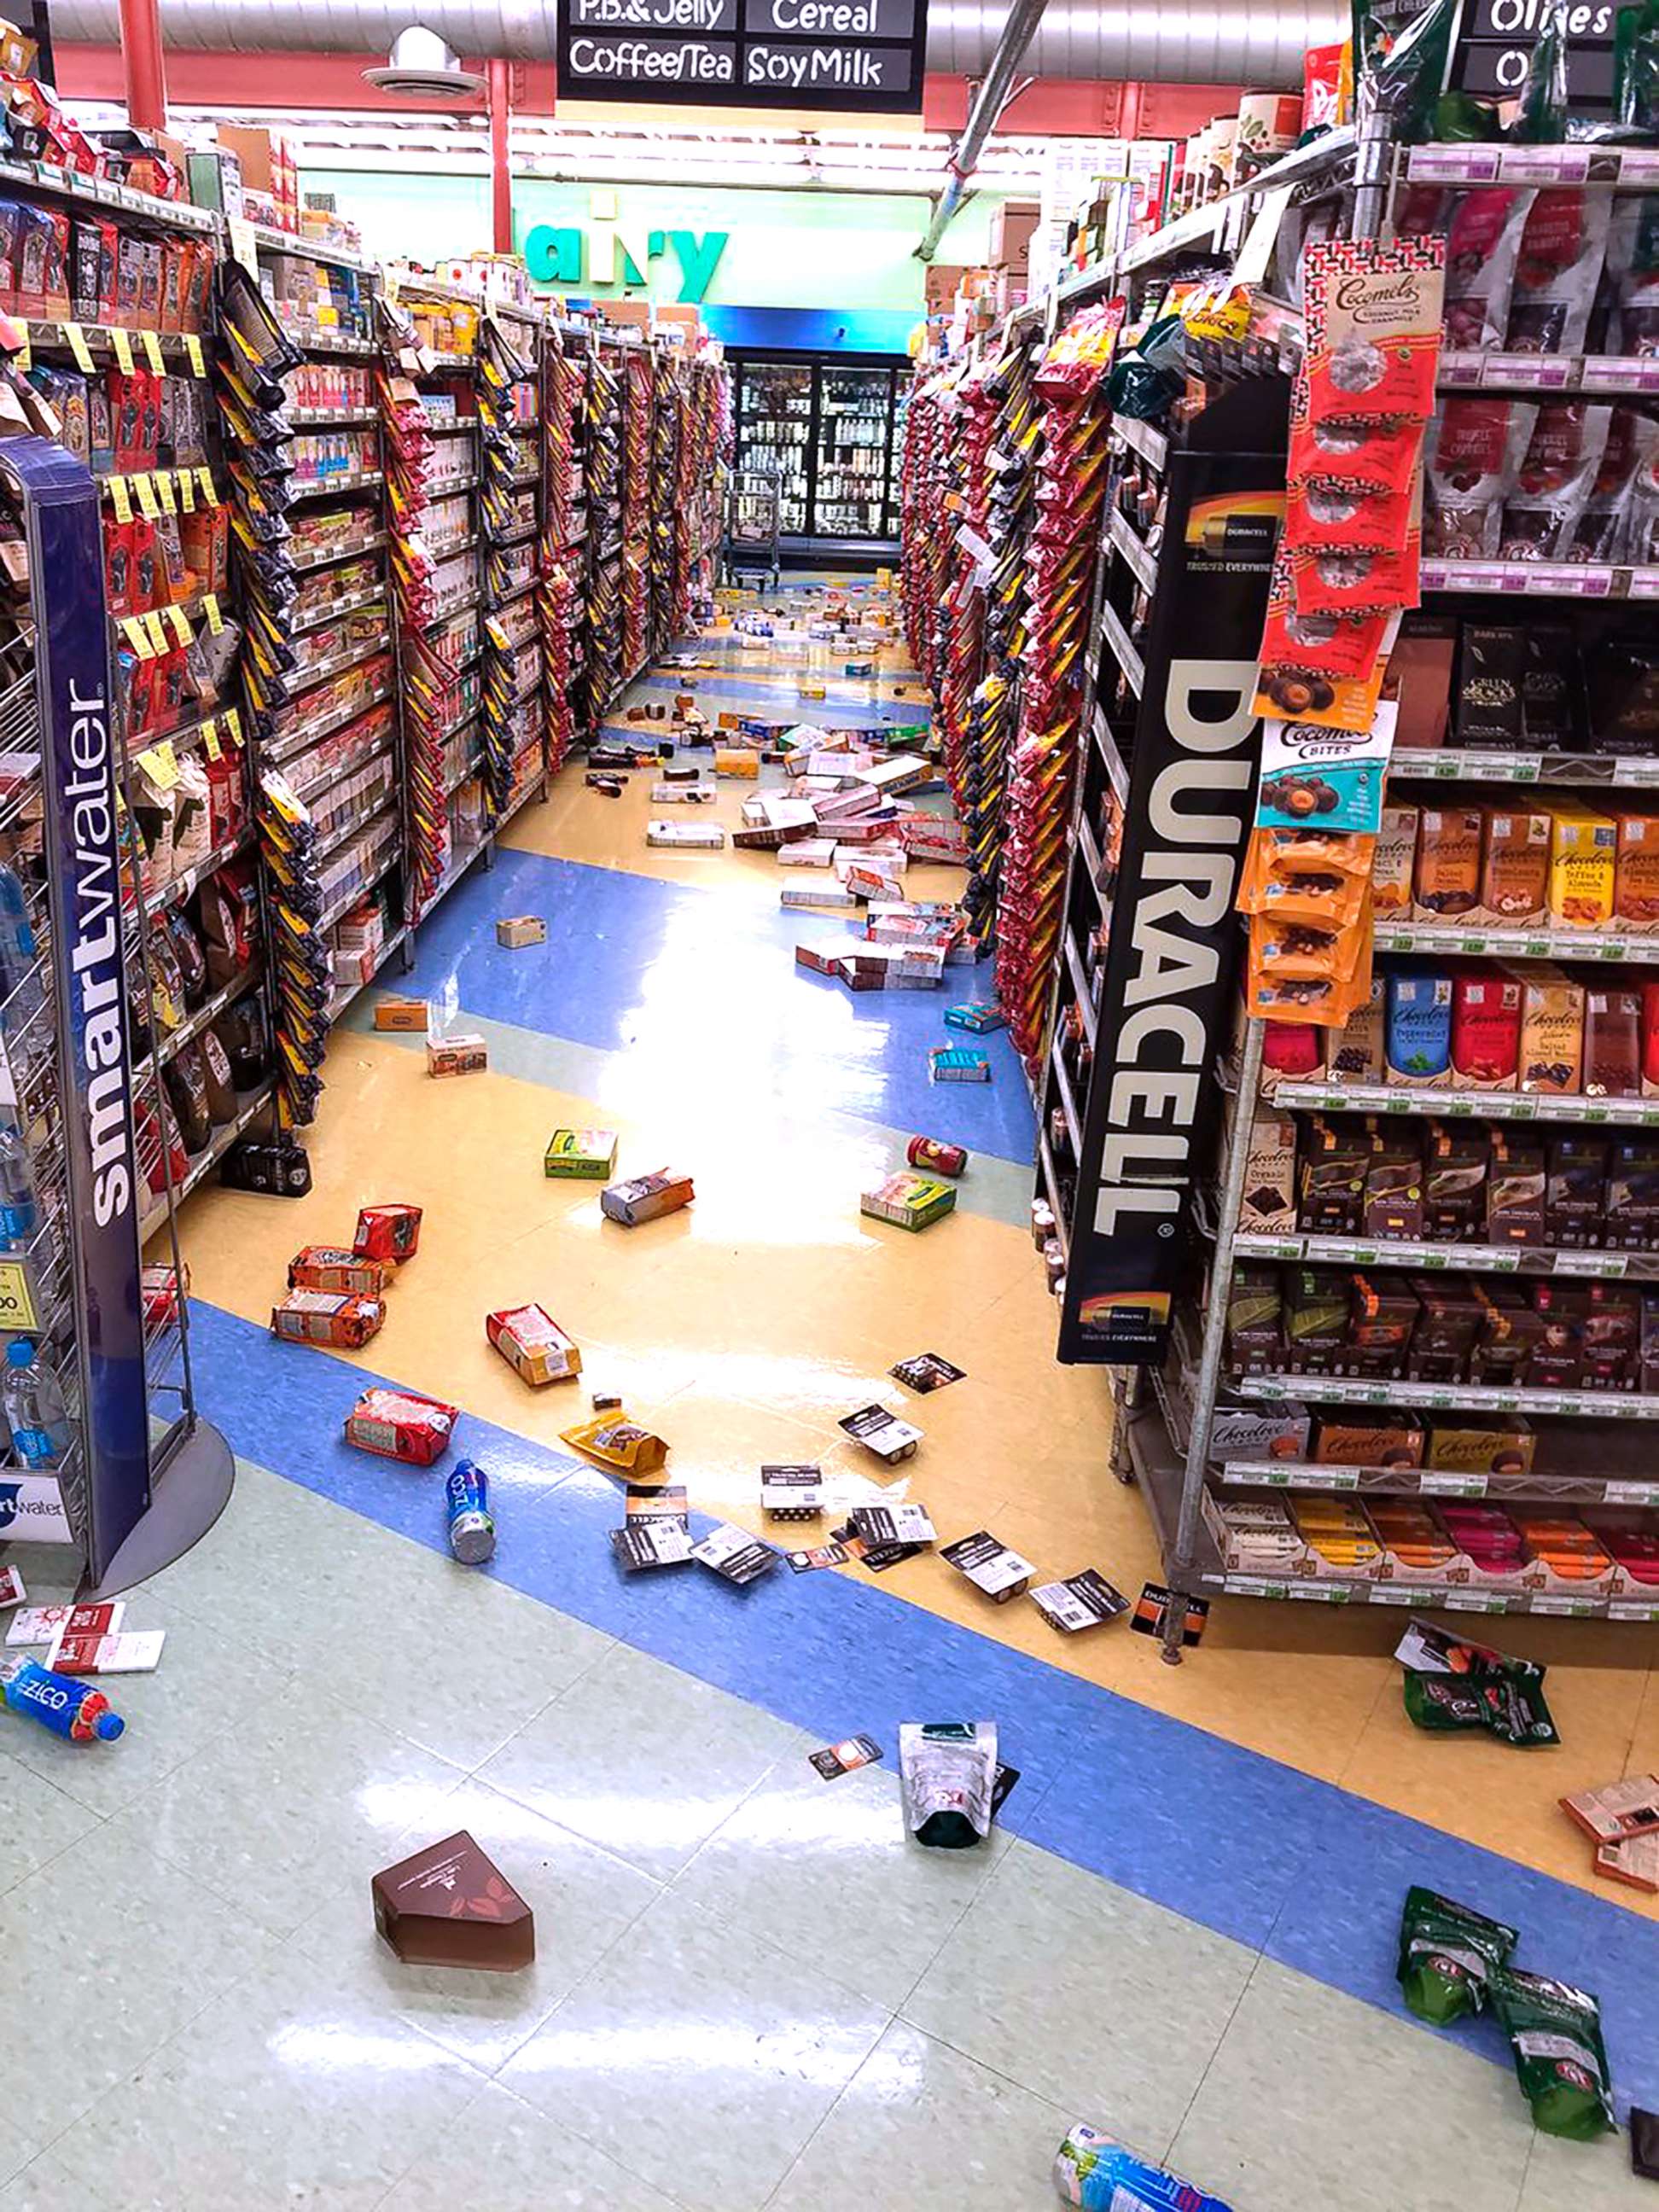 PHOTO: Merchandise that fell off the shelves during an earthquake is pictured at a store in Anchorage, Ala., Nov. 30, 2018.